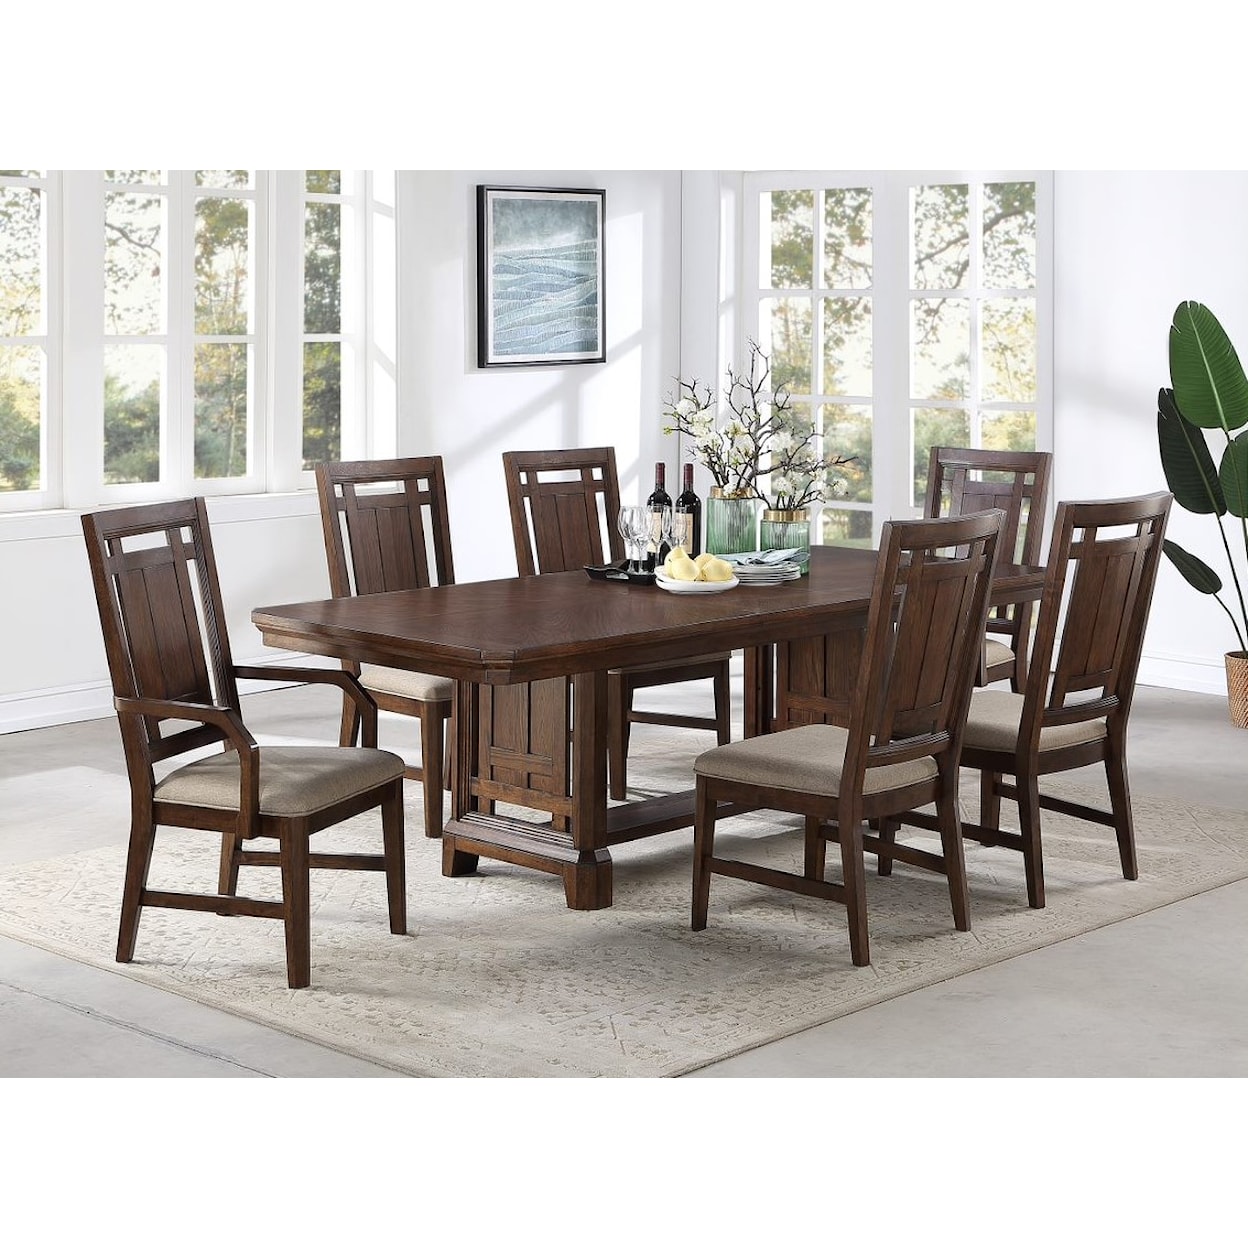 Winners Only Kentwood Dining Table with Leaf